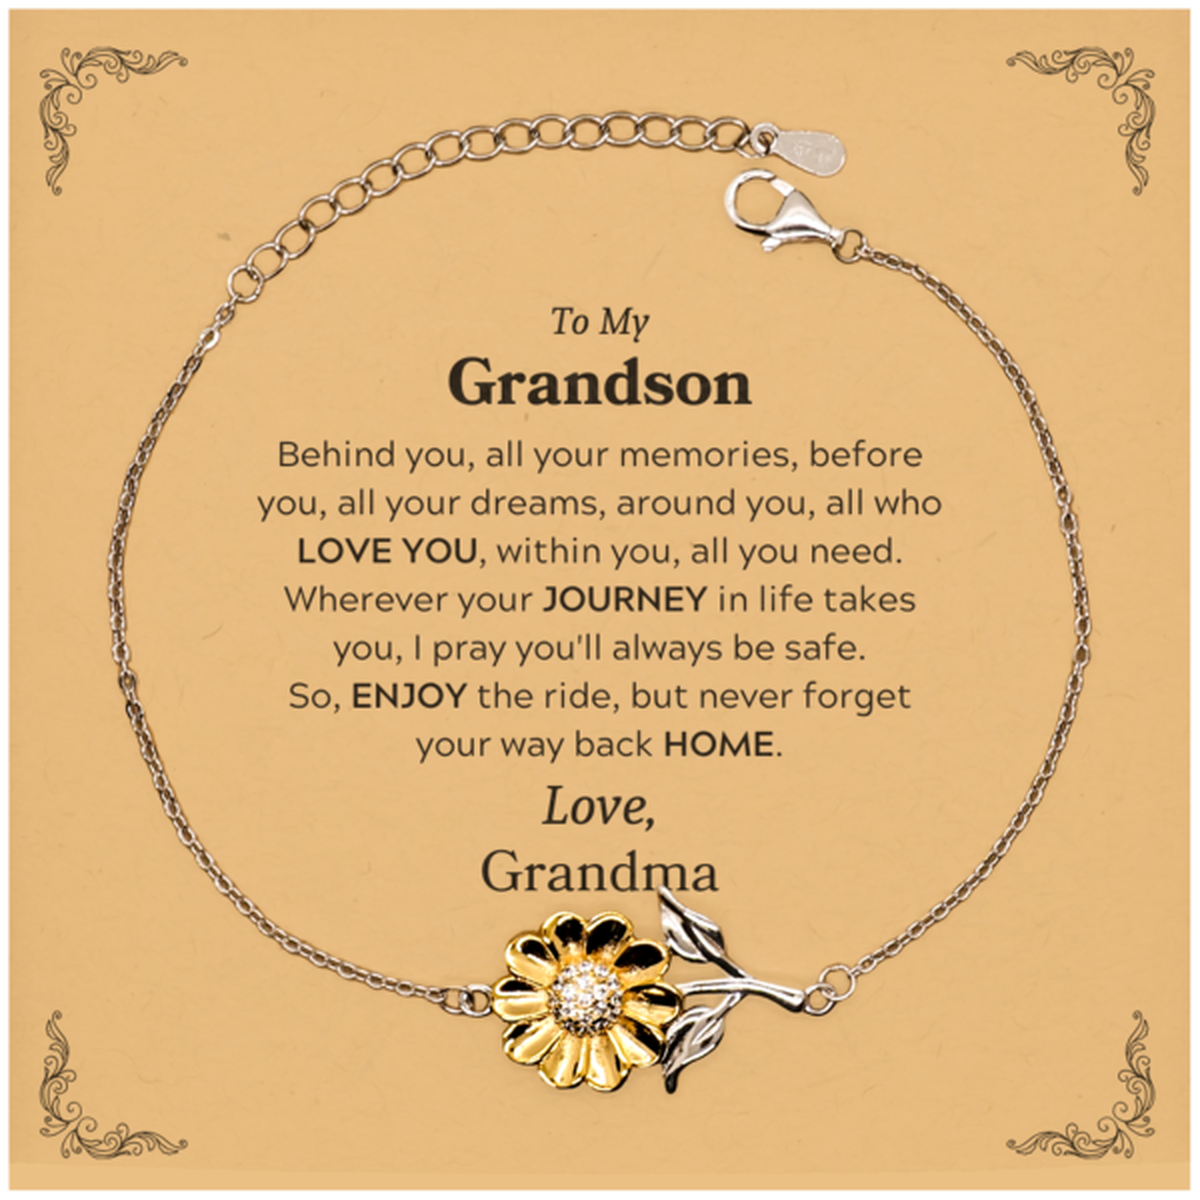 To My Grandson Graduation Gifts from Grandma, Grandson Sunflower Bracelet Christmas Birthday Gifts for Grandson Behind you, all your memories, before you, all your dreams. Love, Grandma